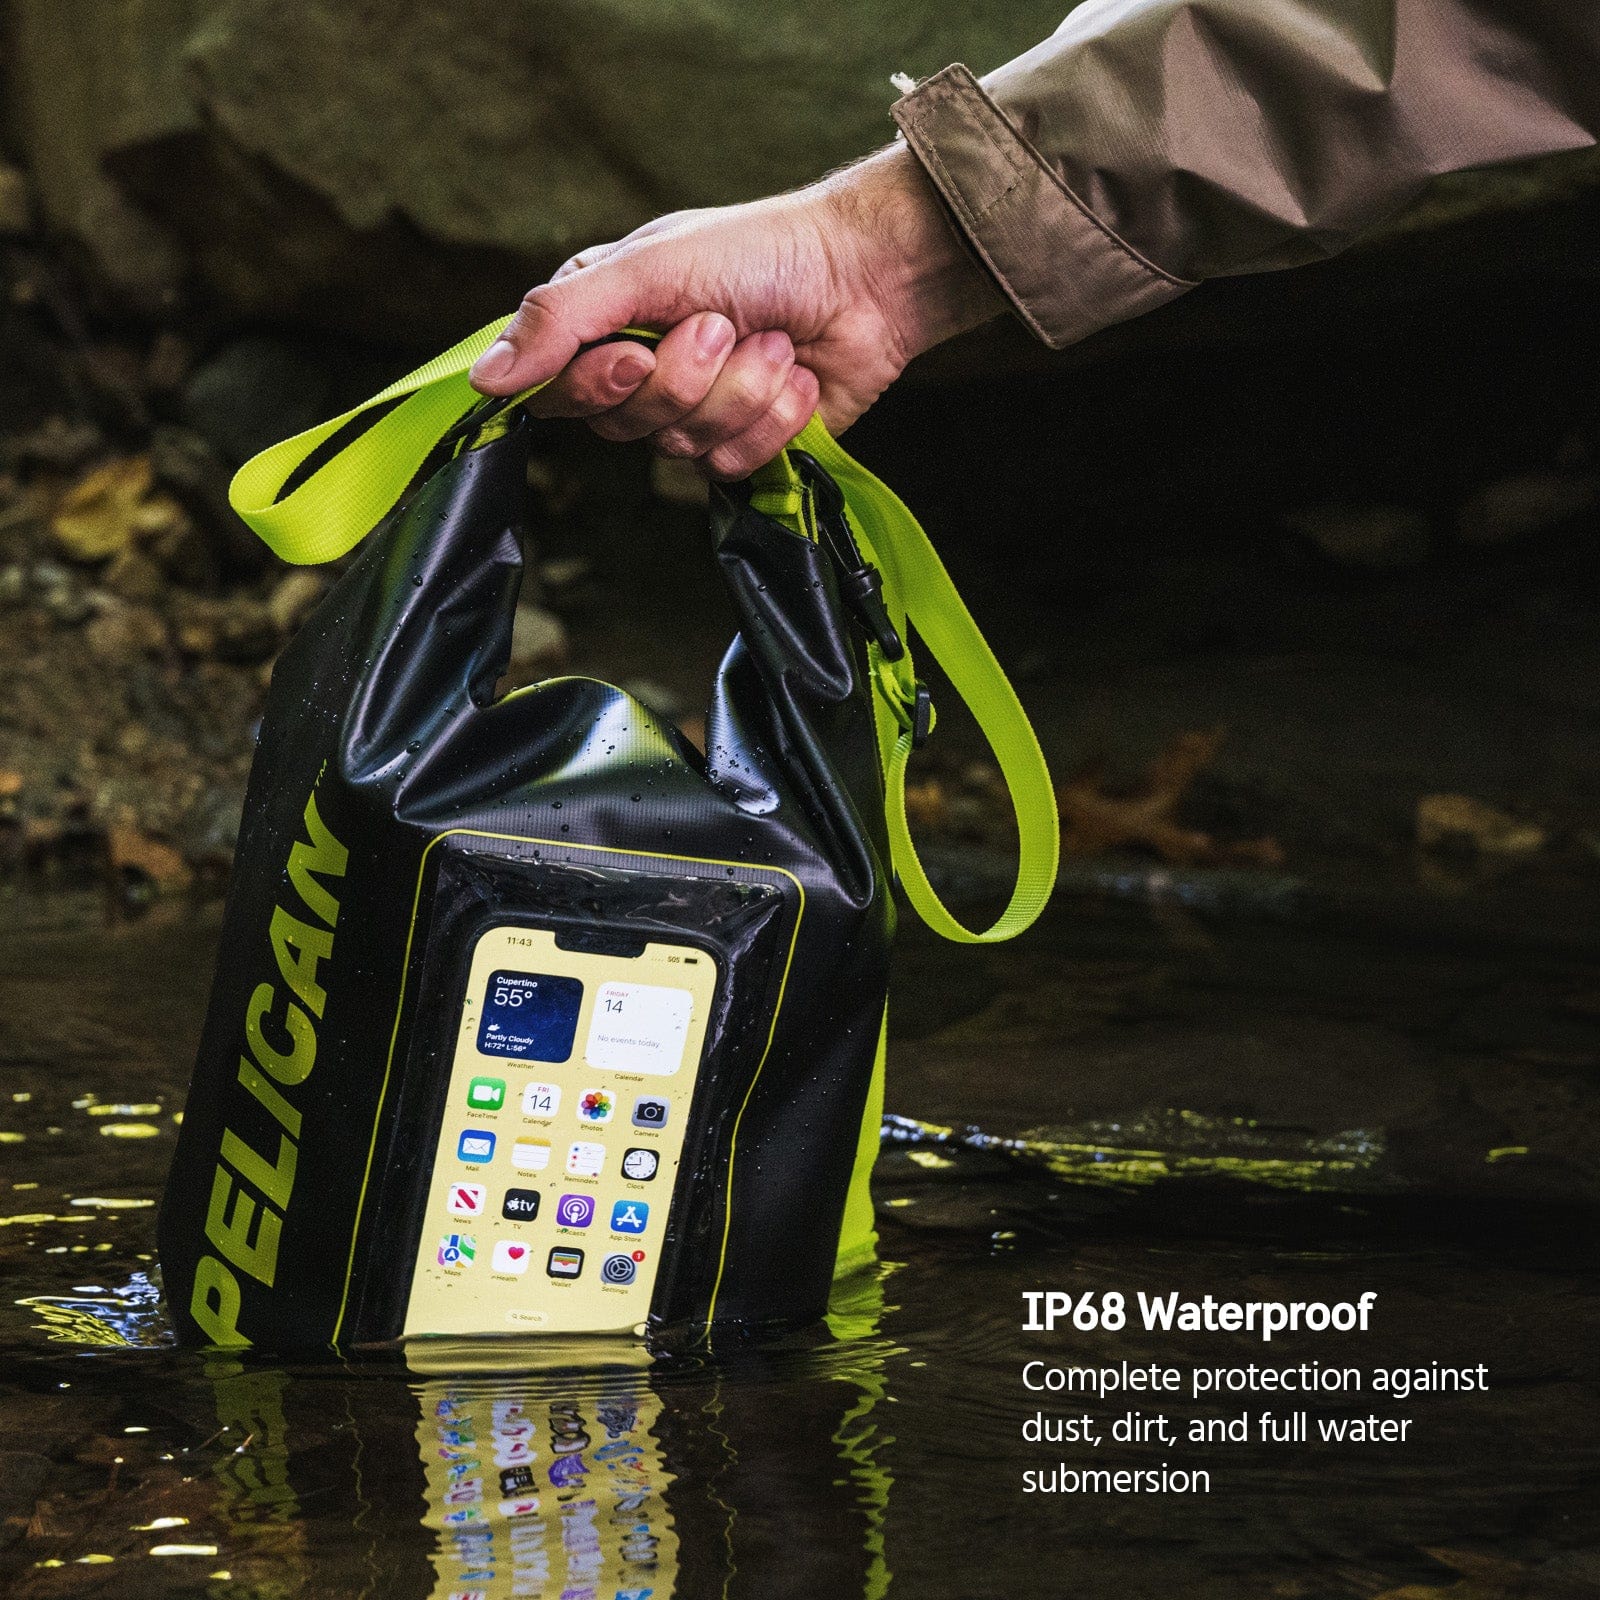 IP68 WATERPROOF. COMPLETE PROTECTION AGAINST DUST, DIRT, AND FULL WATER SUBMERSION